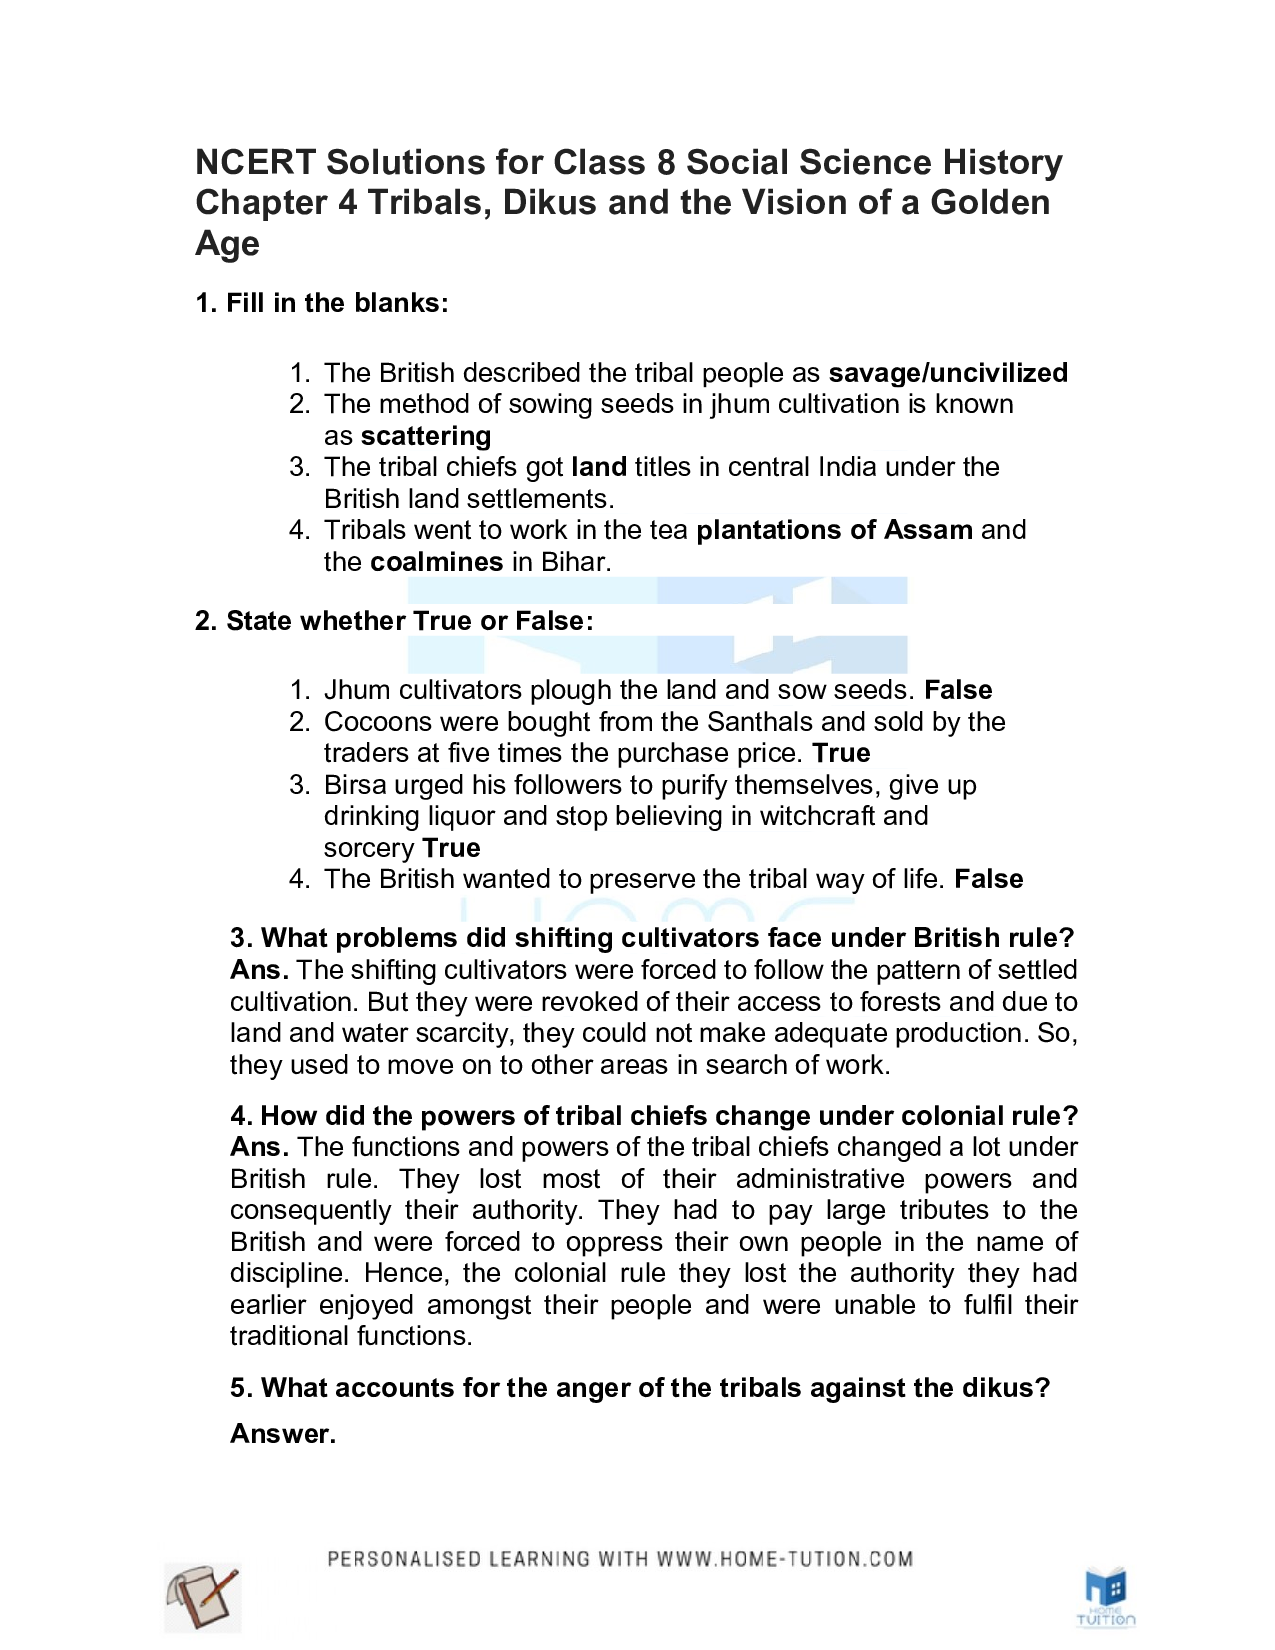 Chapter 4 – Tribal, Dikus and the Vision of a Golden Age